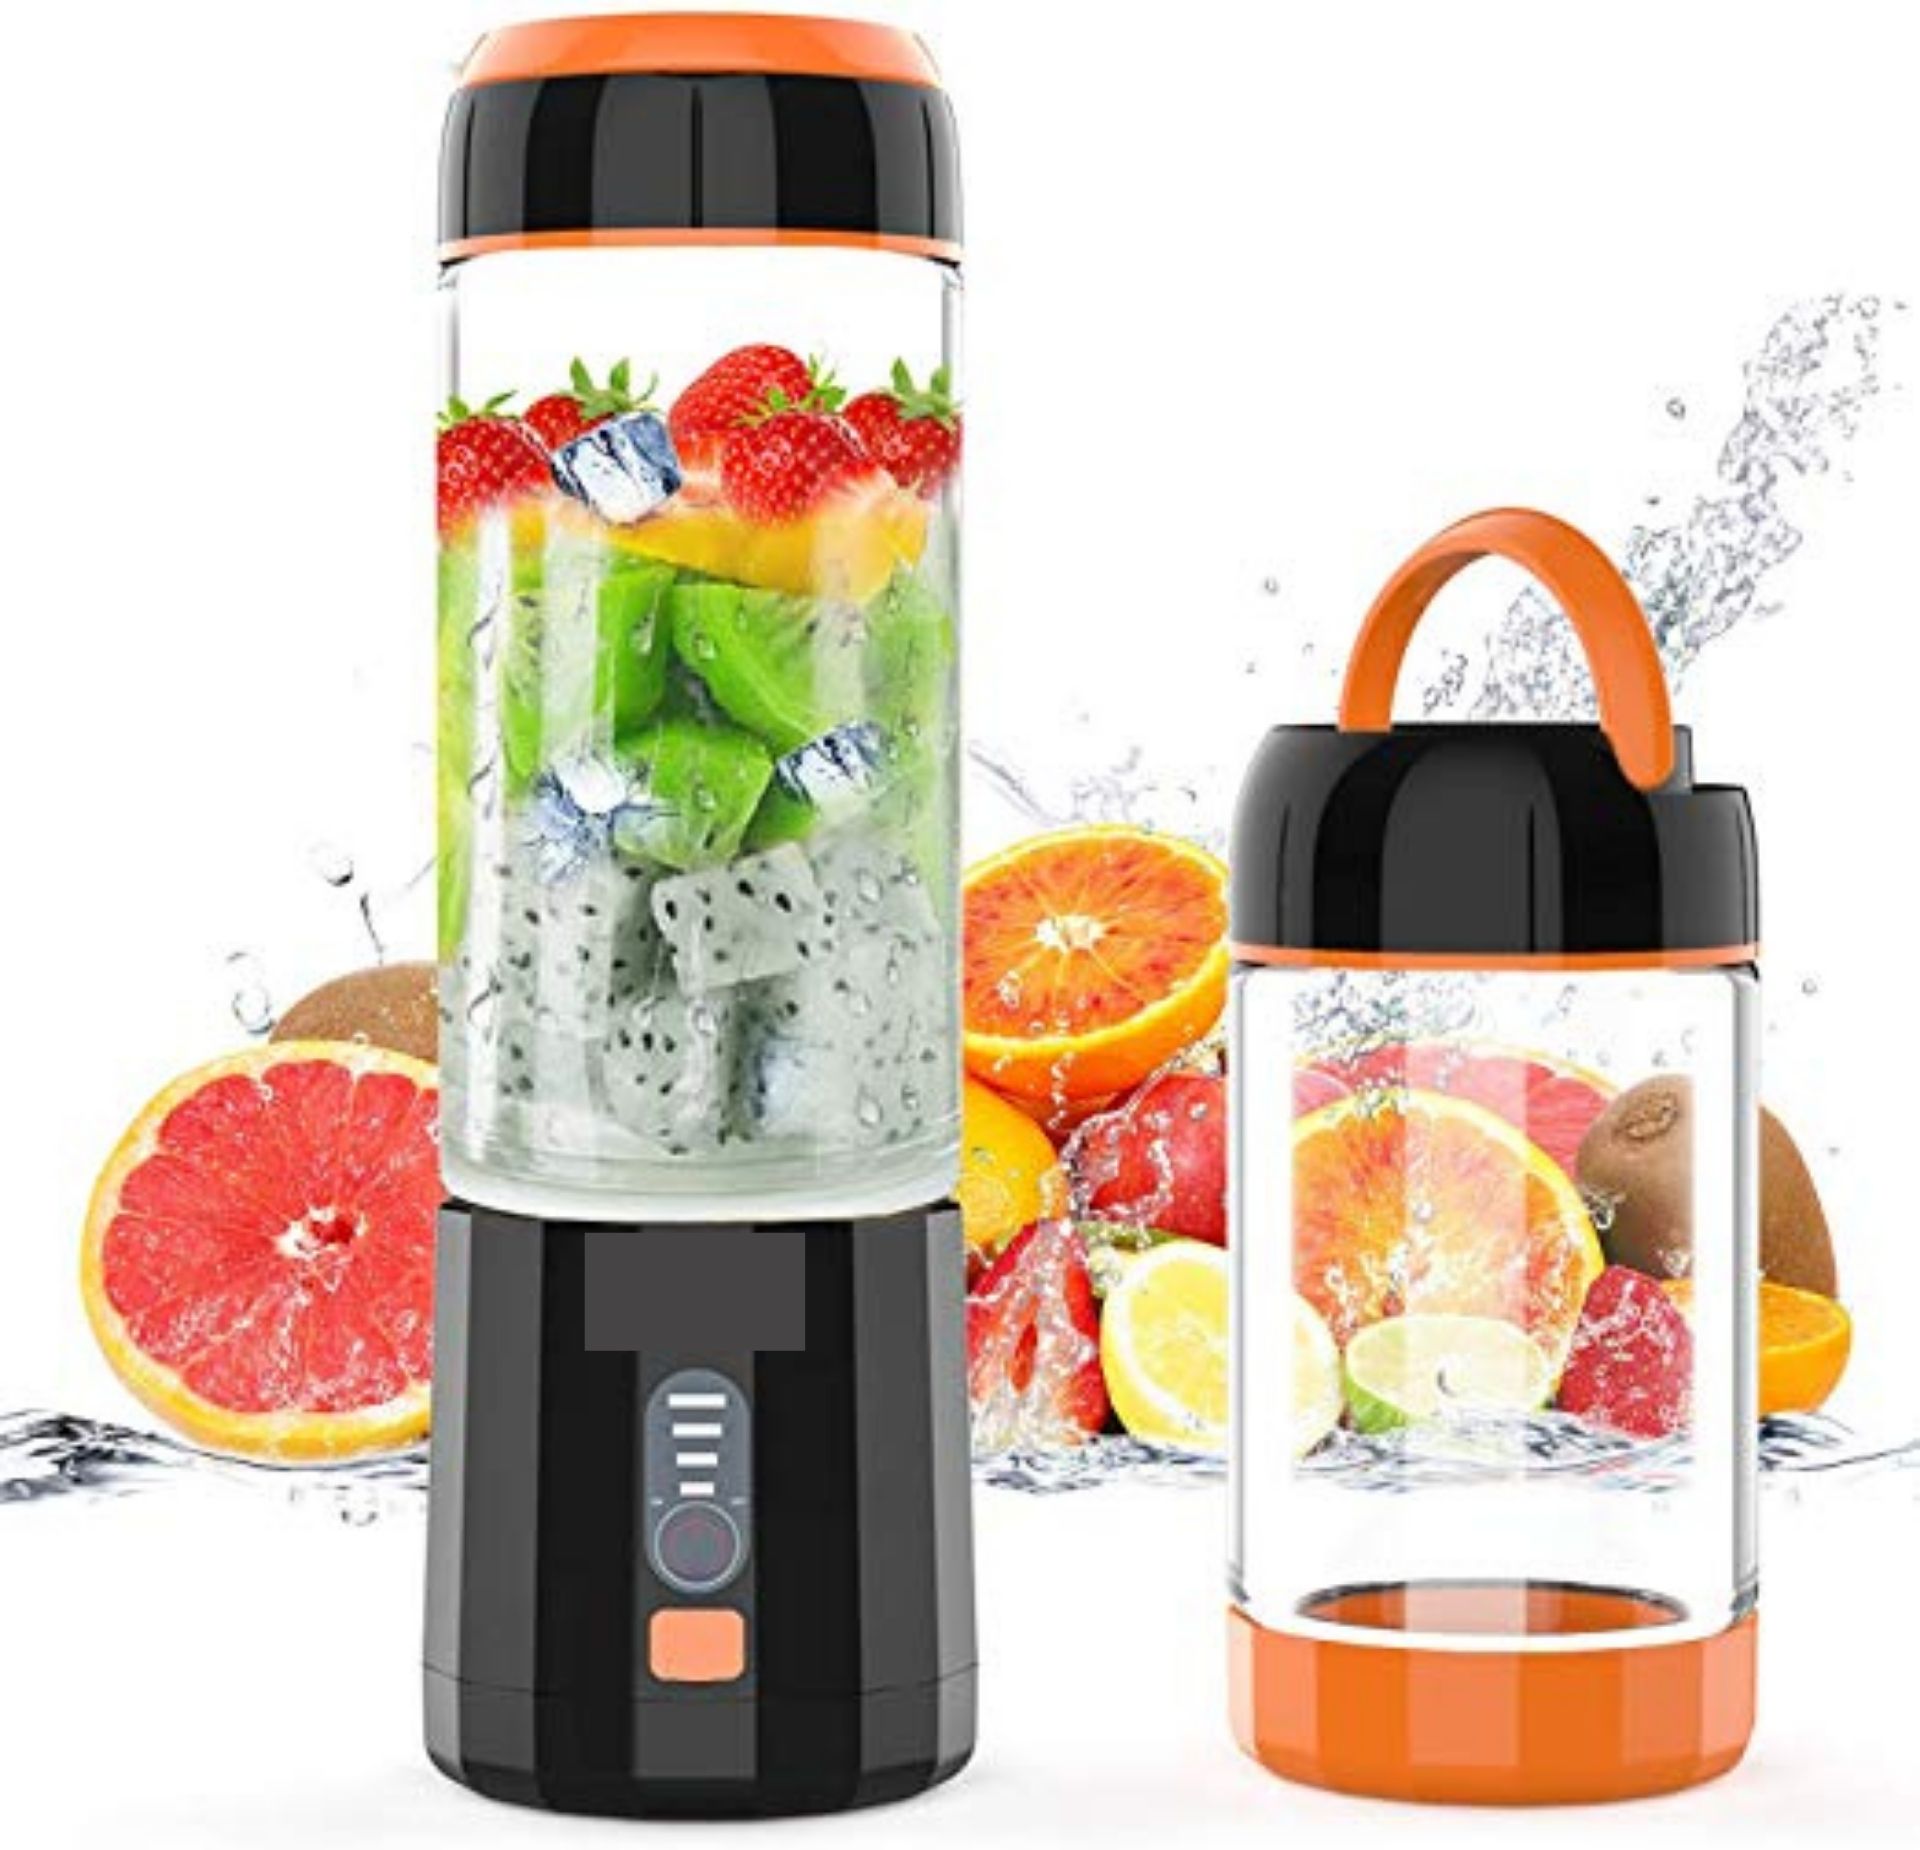 Lozayi Portable Blender Review (2023): Features + Pros/Cons